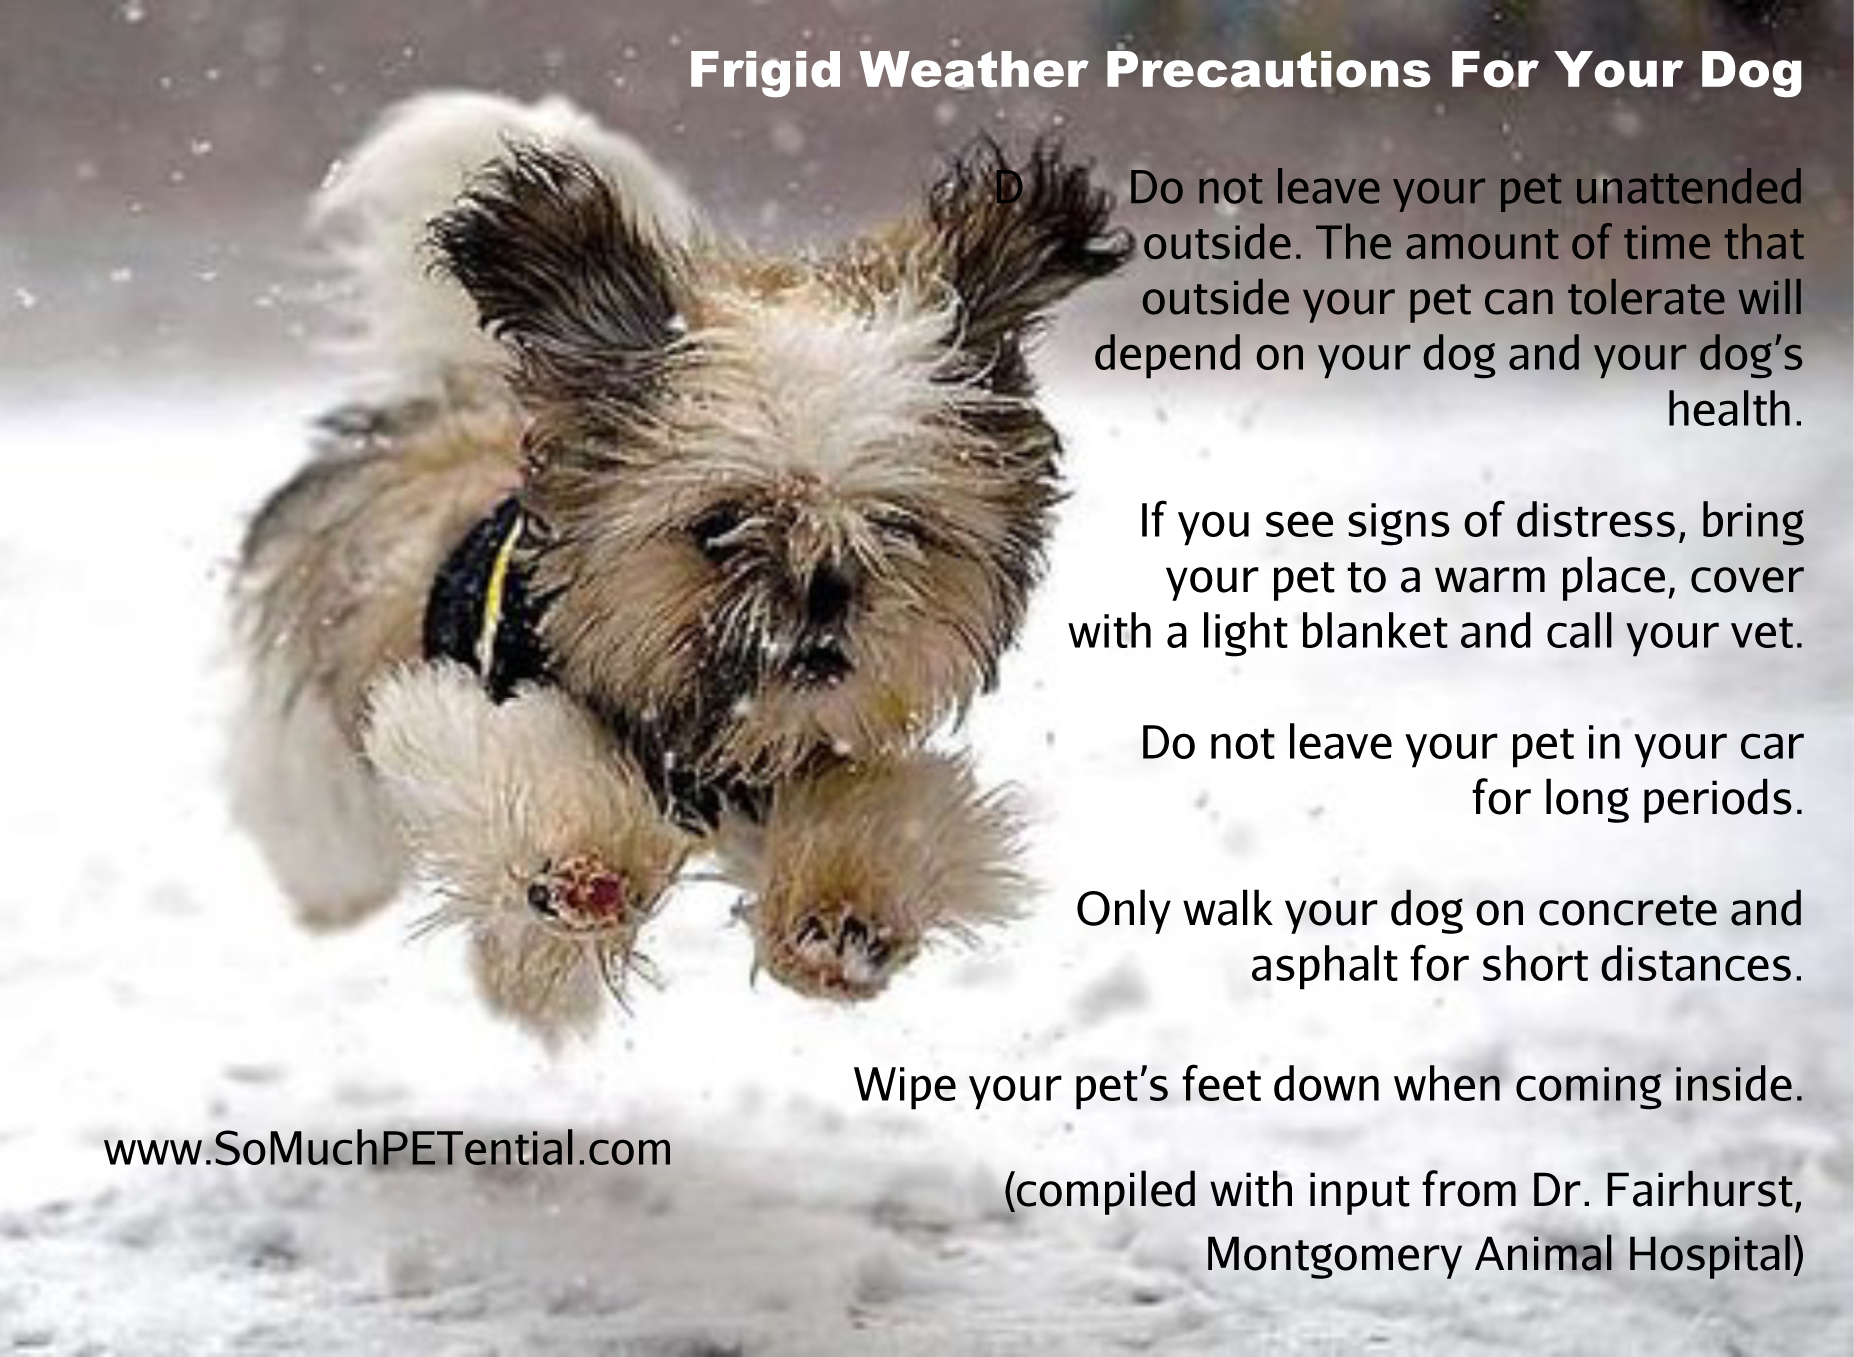 dog safety tips in frigid weather